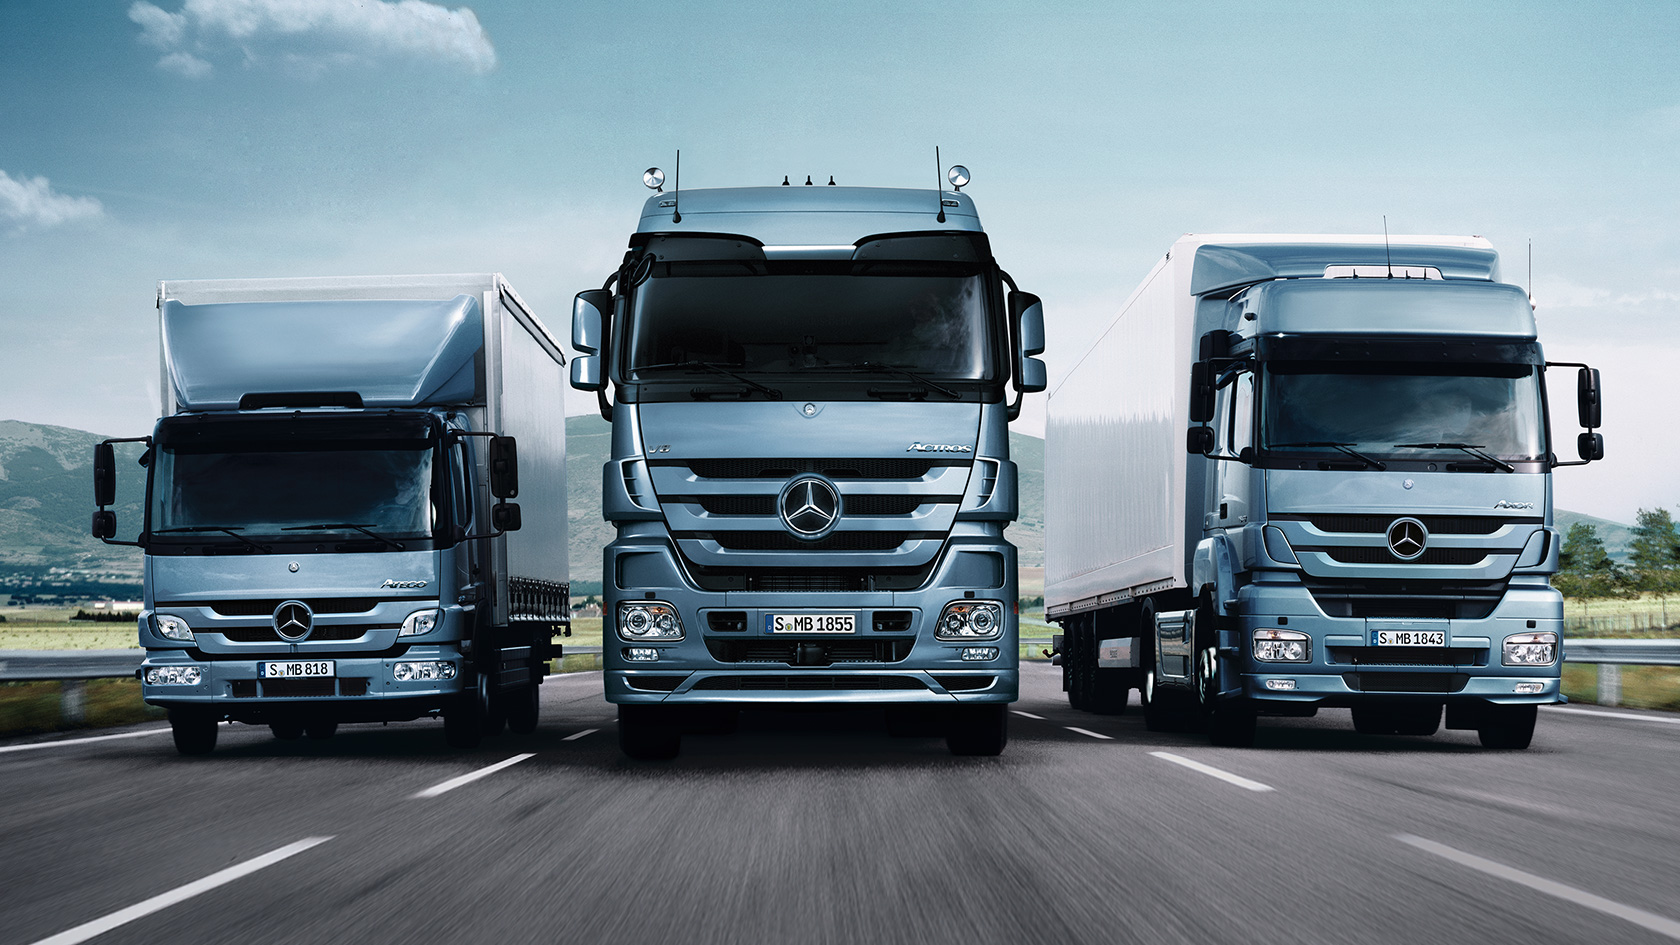 Download Mercedes Actros wallpapers Free for Android - Mercedes Actros  wallpapers APK Download - STEPrimo.com